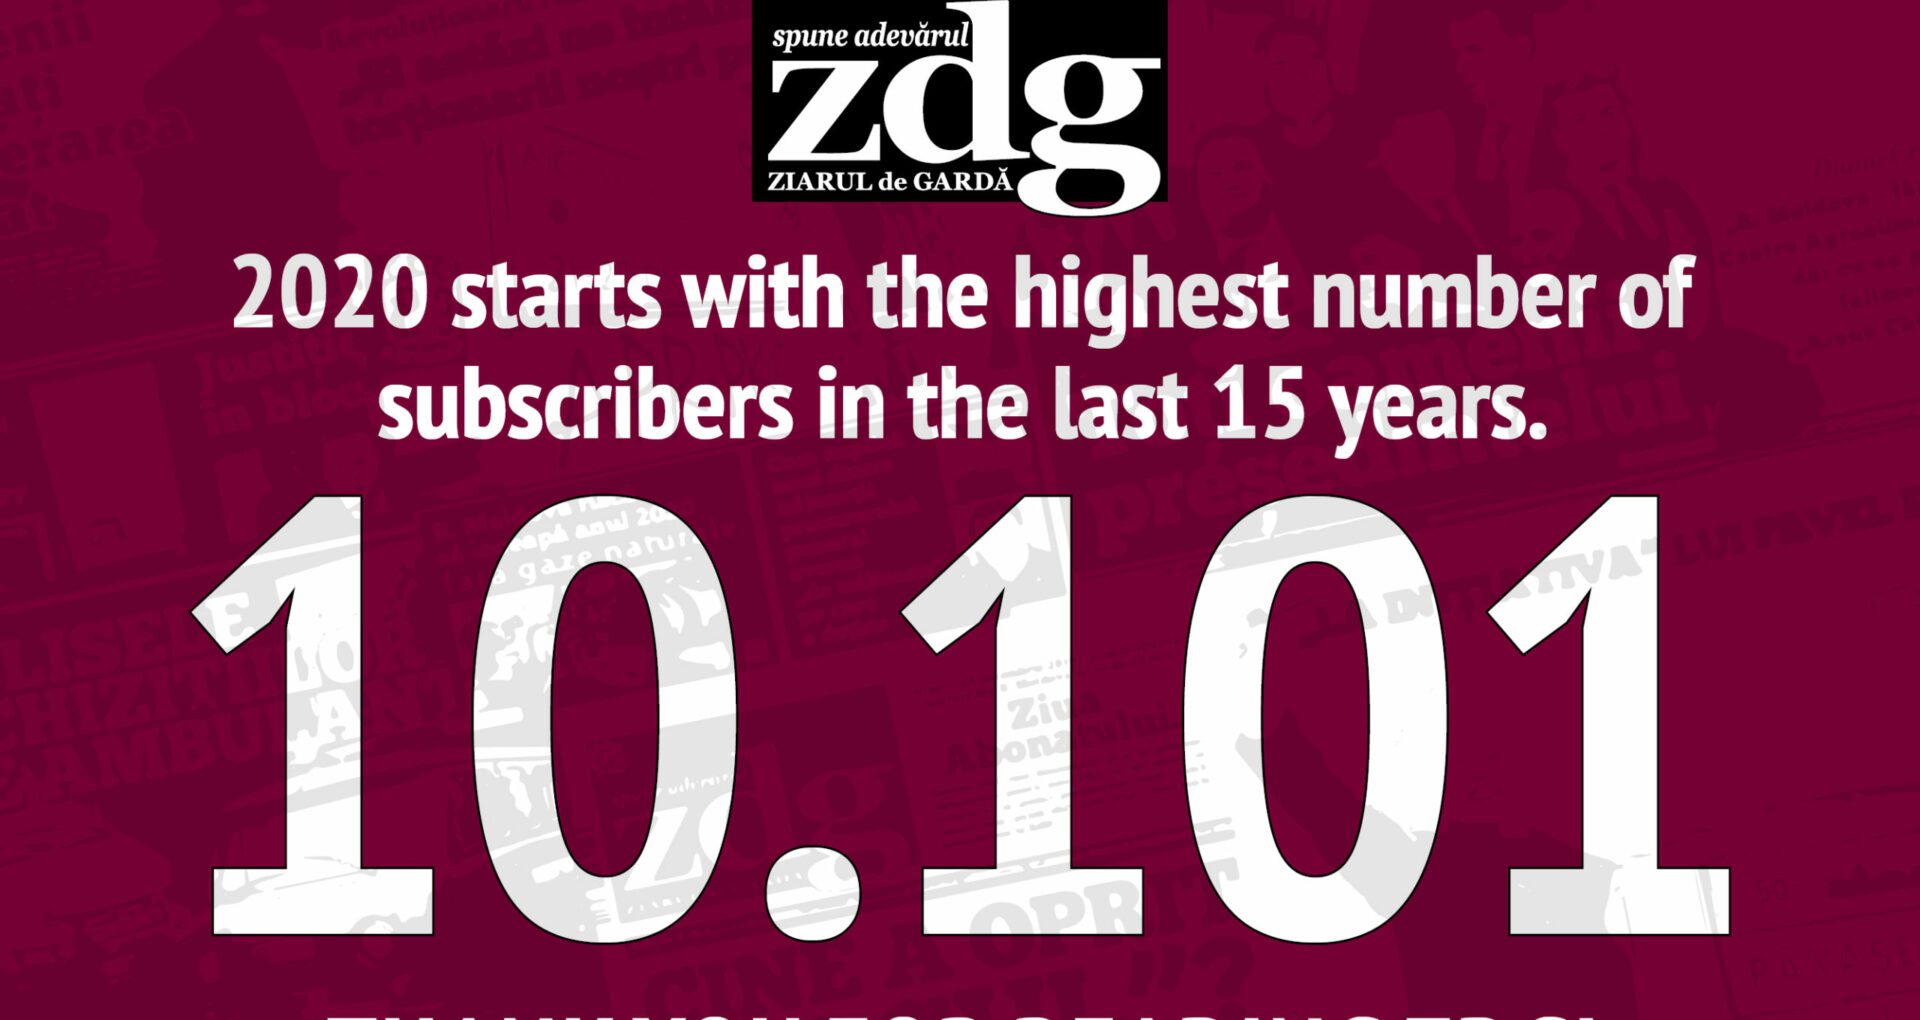 Historical Circulation for ZdG’s Print Edition: Largest Number of Subscribers in the Last 15 Years